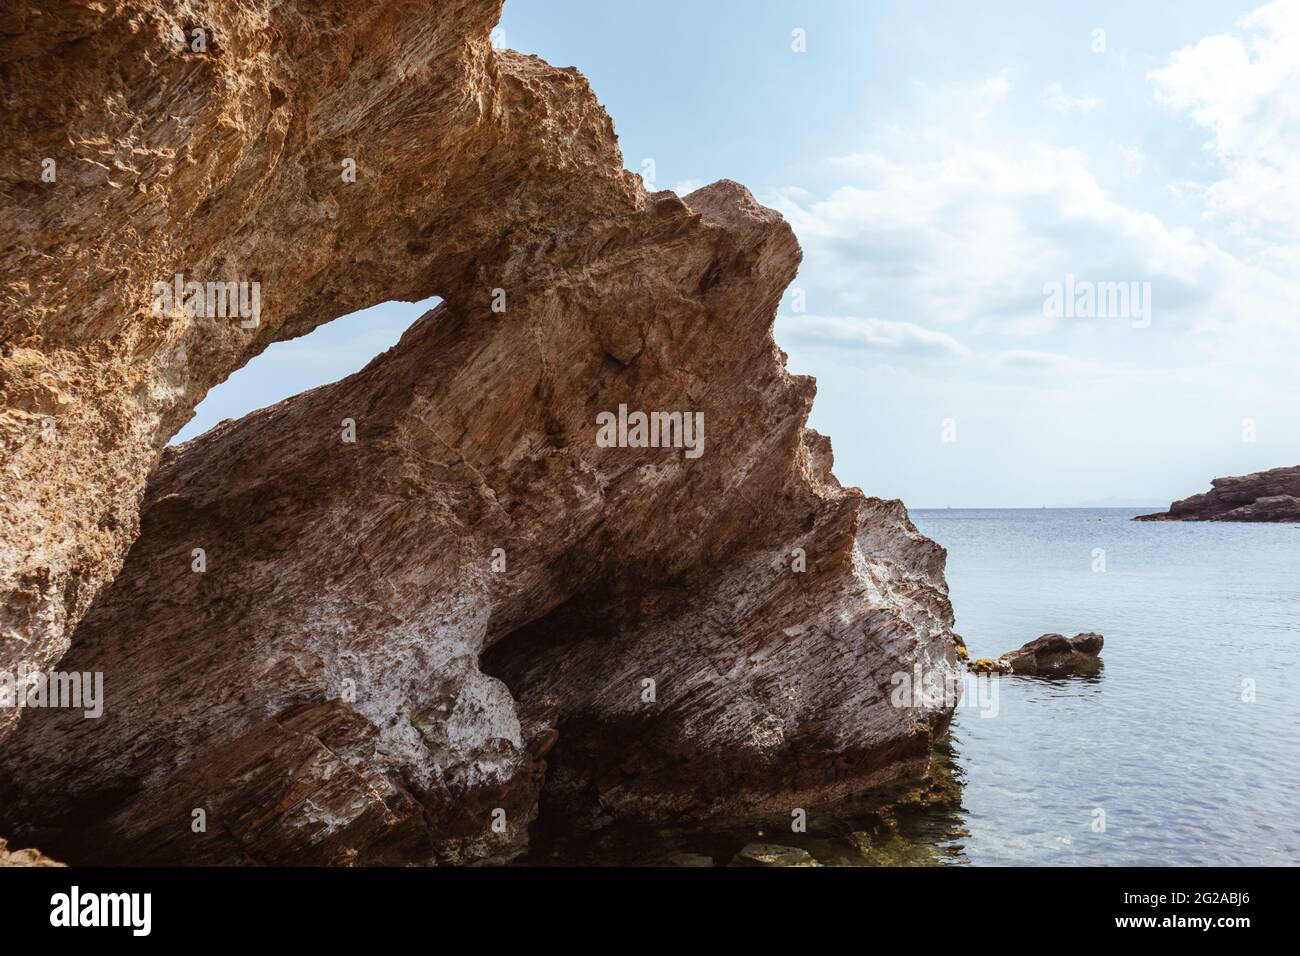 Big rock with a hole close view on wild mediterranean sea shore with crystal clear water. Travel Greece near Athens. Summer nature scenic lagoon Stock Photo